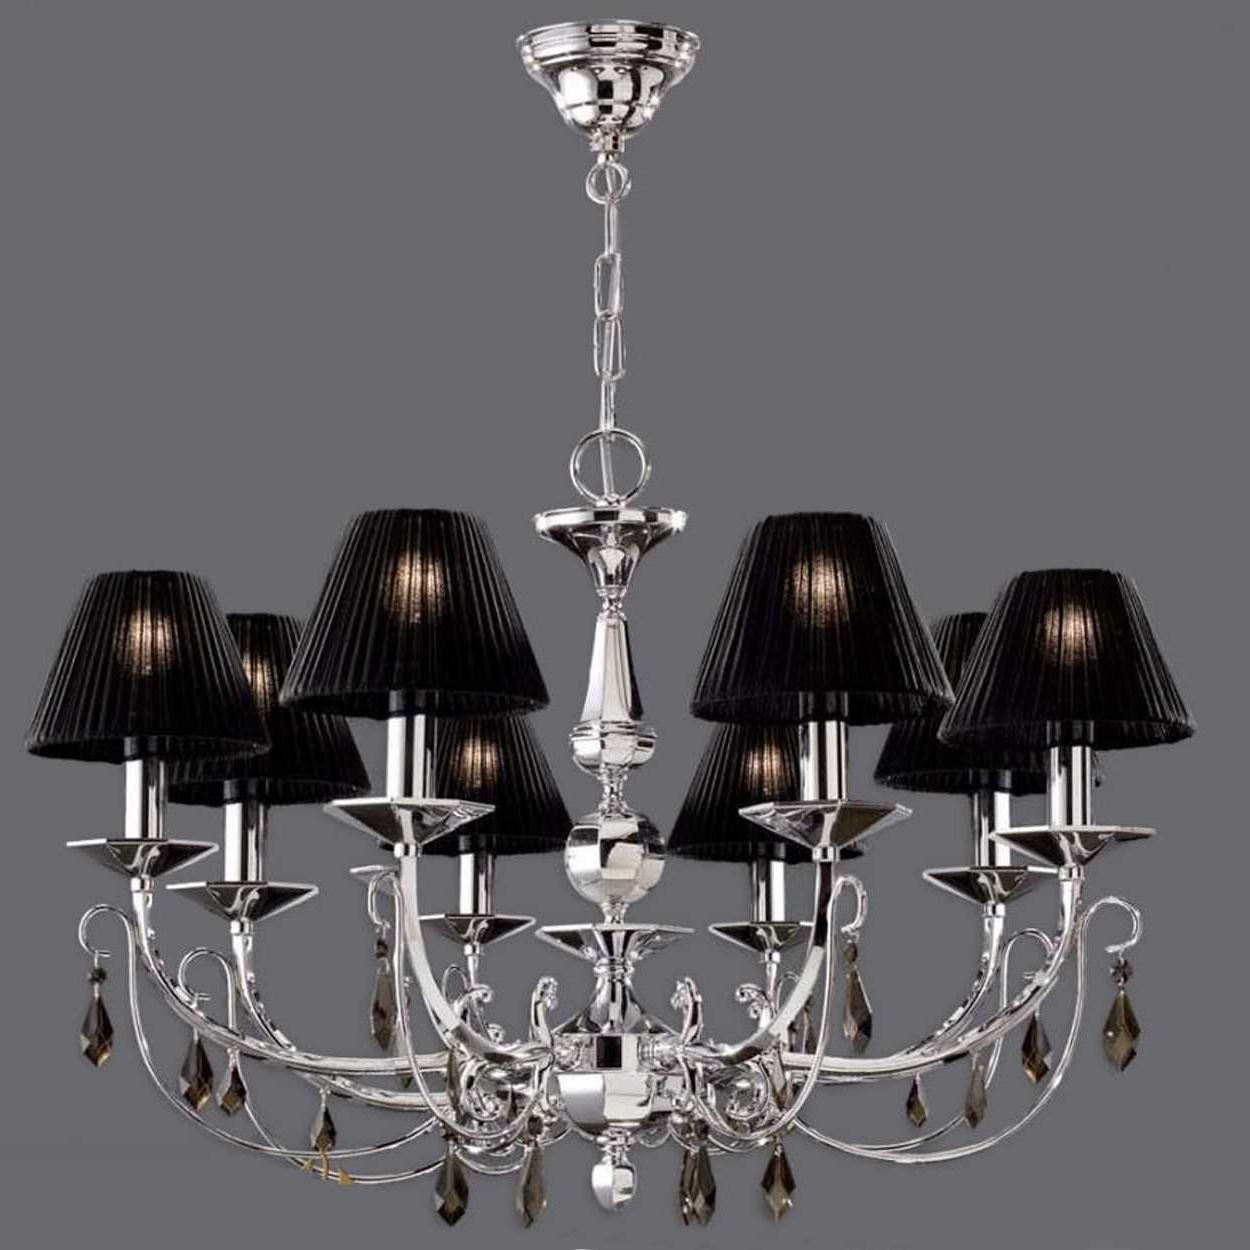 Fashionable Chandelier Lampshades Regarding Black Lamp Shade With Crystals Fringed Also Chandeliers Design (View 13 of 15)